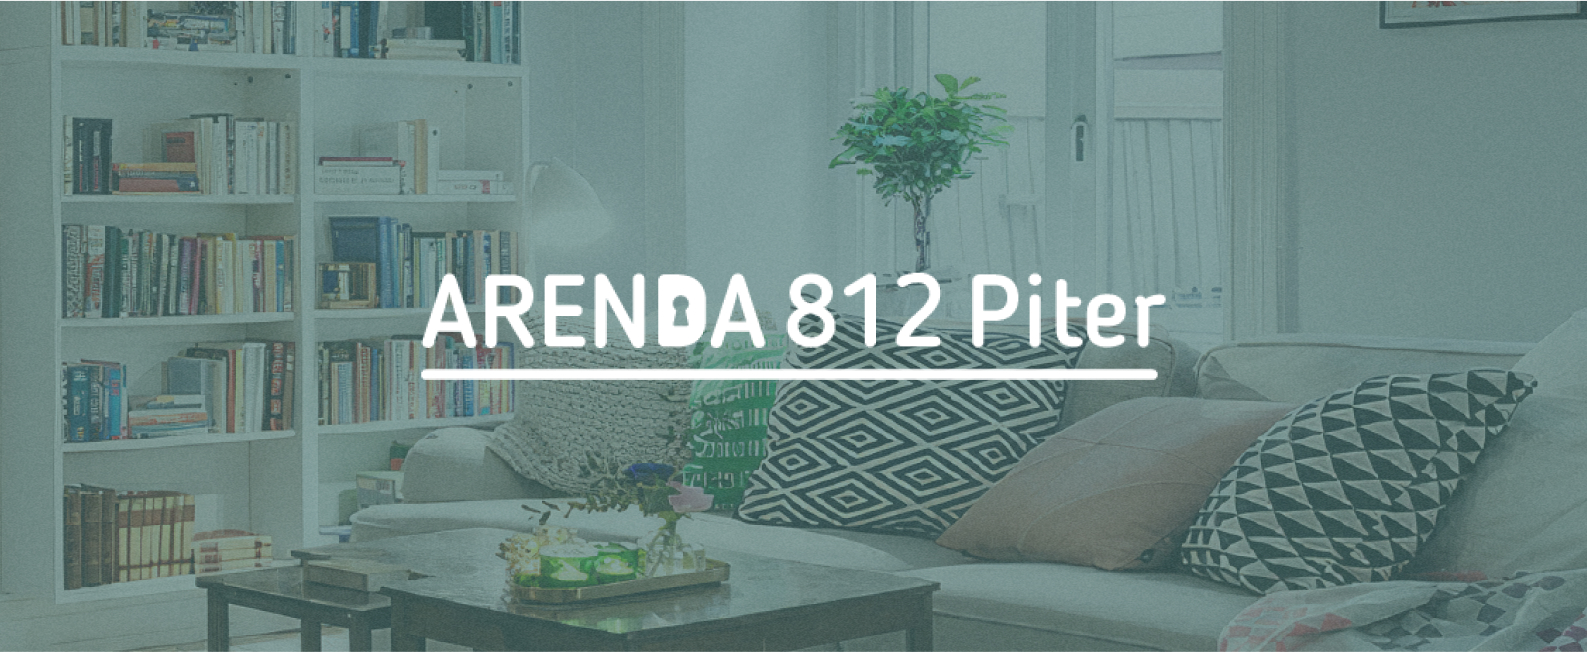 Arenda 812 Piter - housing rental service from owners